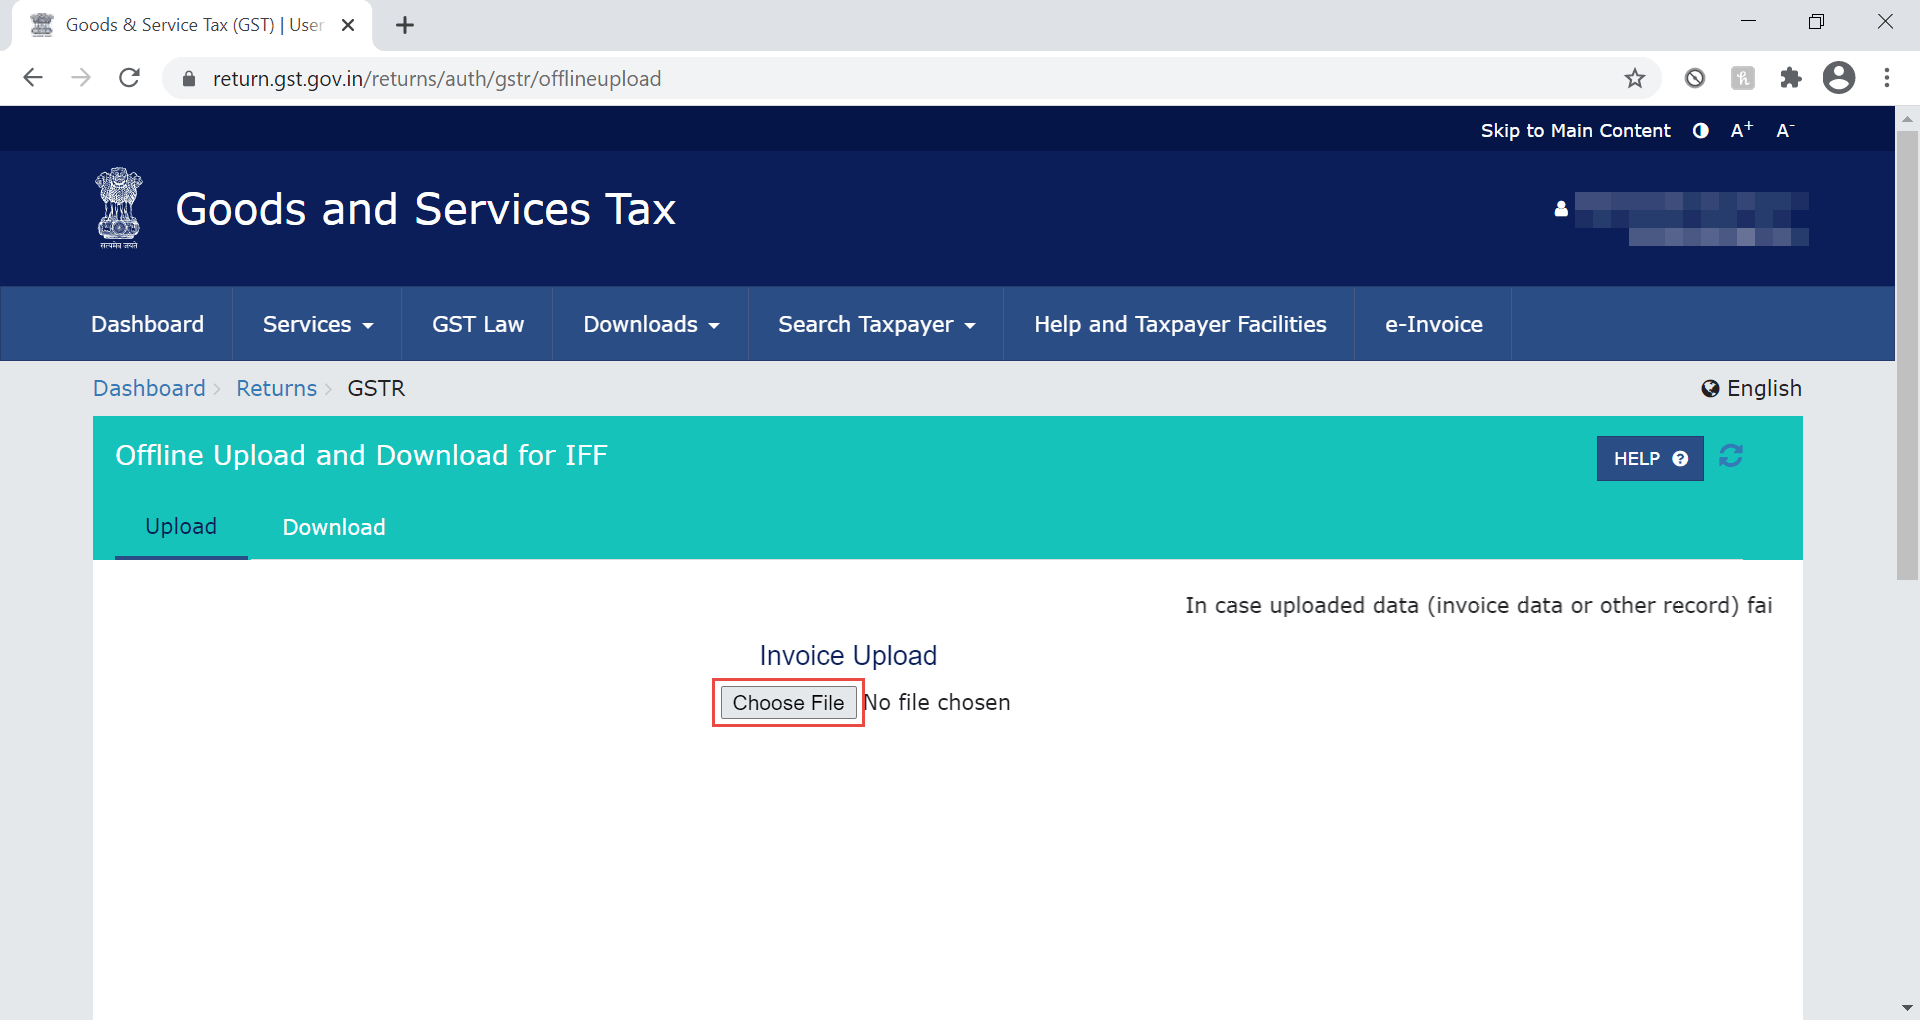 Choose Files to Upload for IFF on the GST Portal